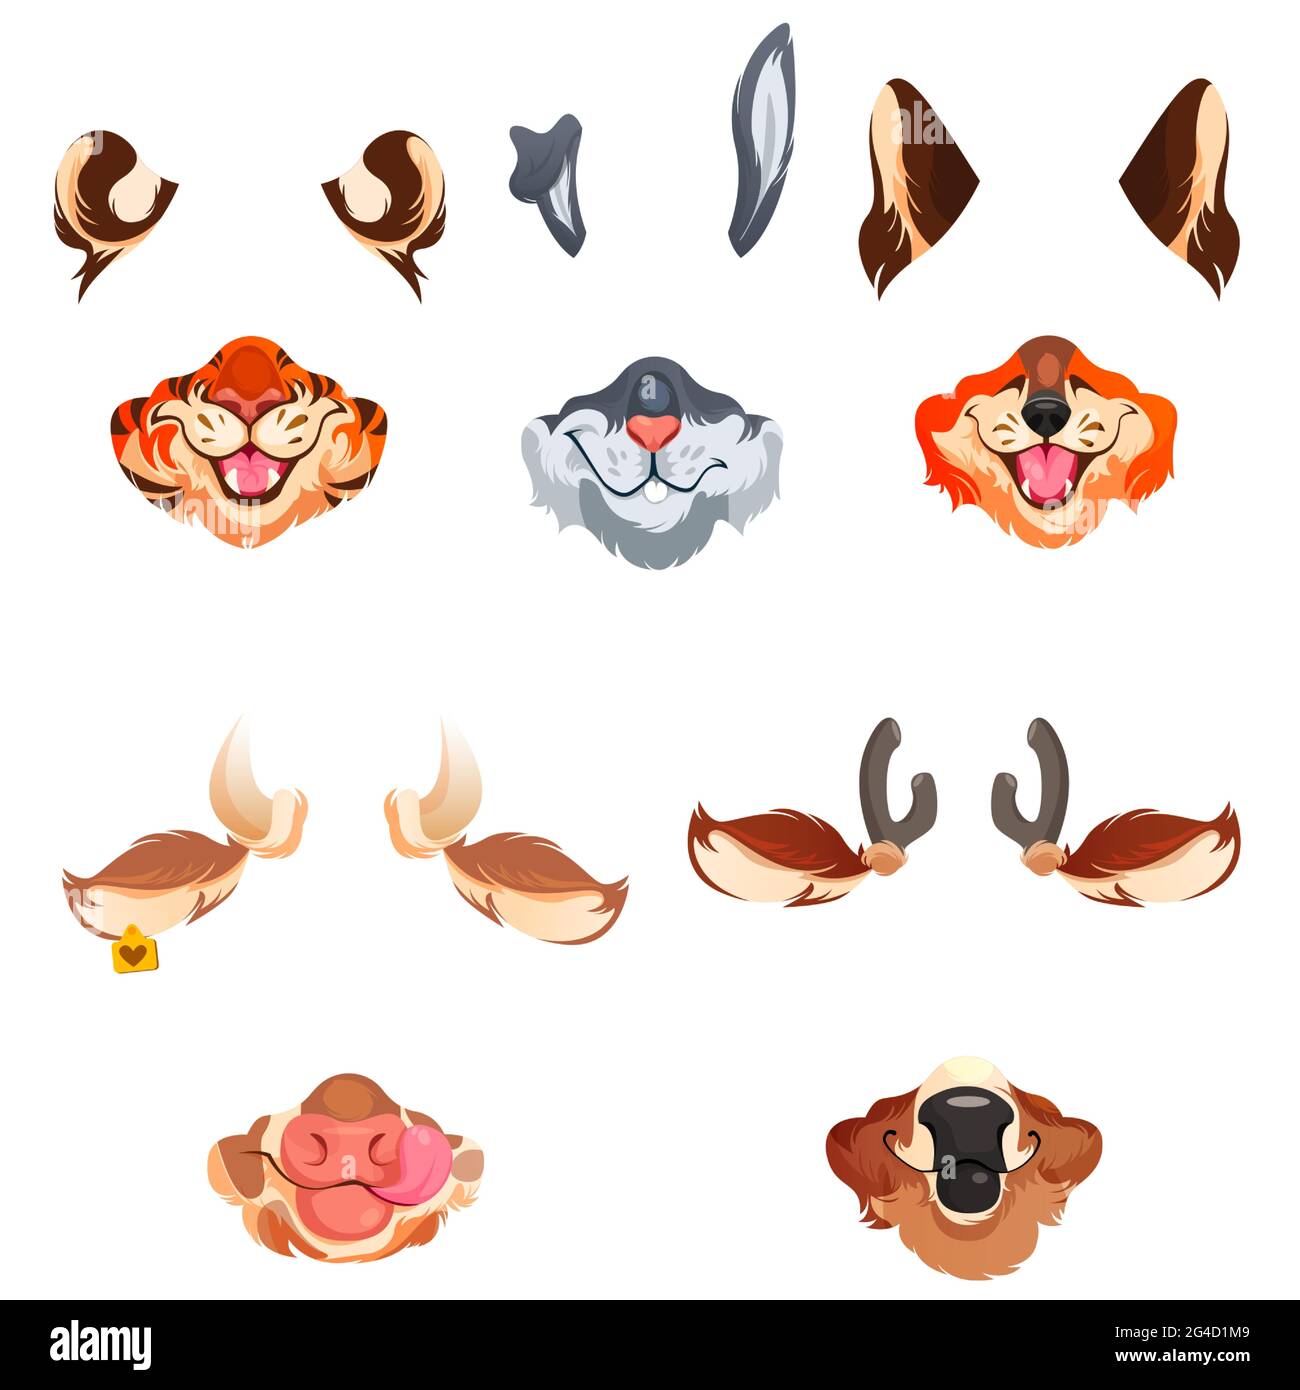 Animal face masks for social networks, selfie photo or video chat filter.  Cute tiger, rabbit, fox and cow or deer muzzles, ears, noses and fur  elements isolated on white background, cartoon vector